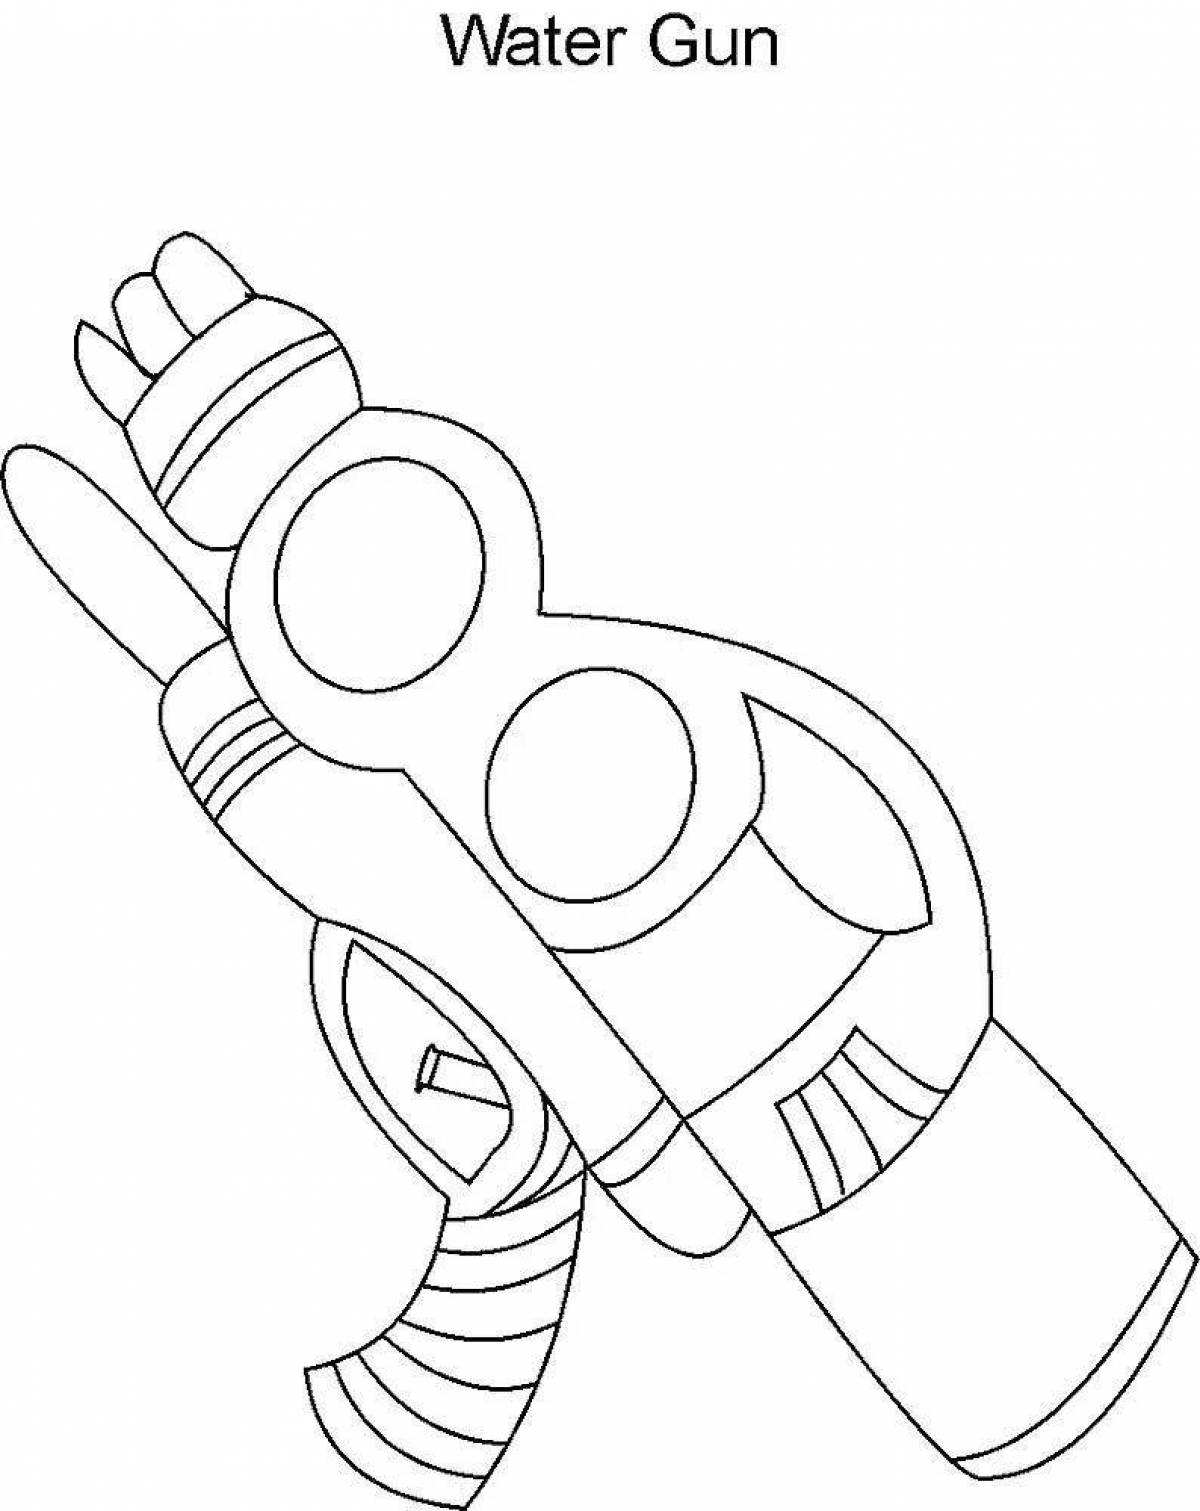 Amazing coloring pages of guns for boys